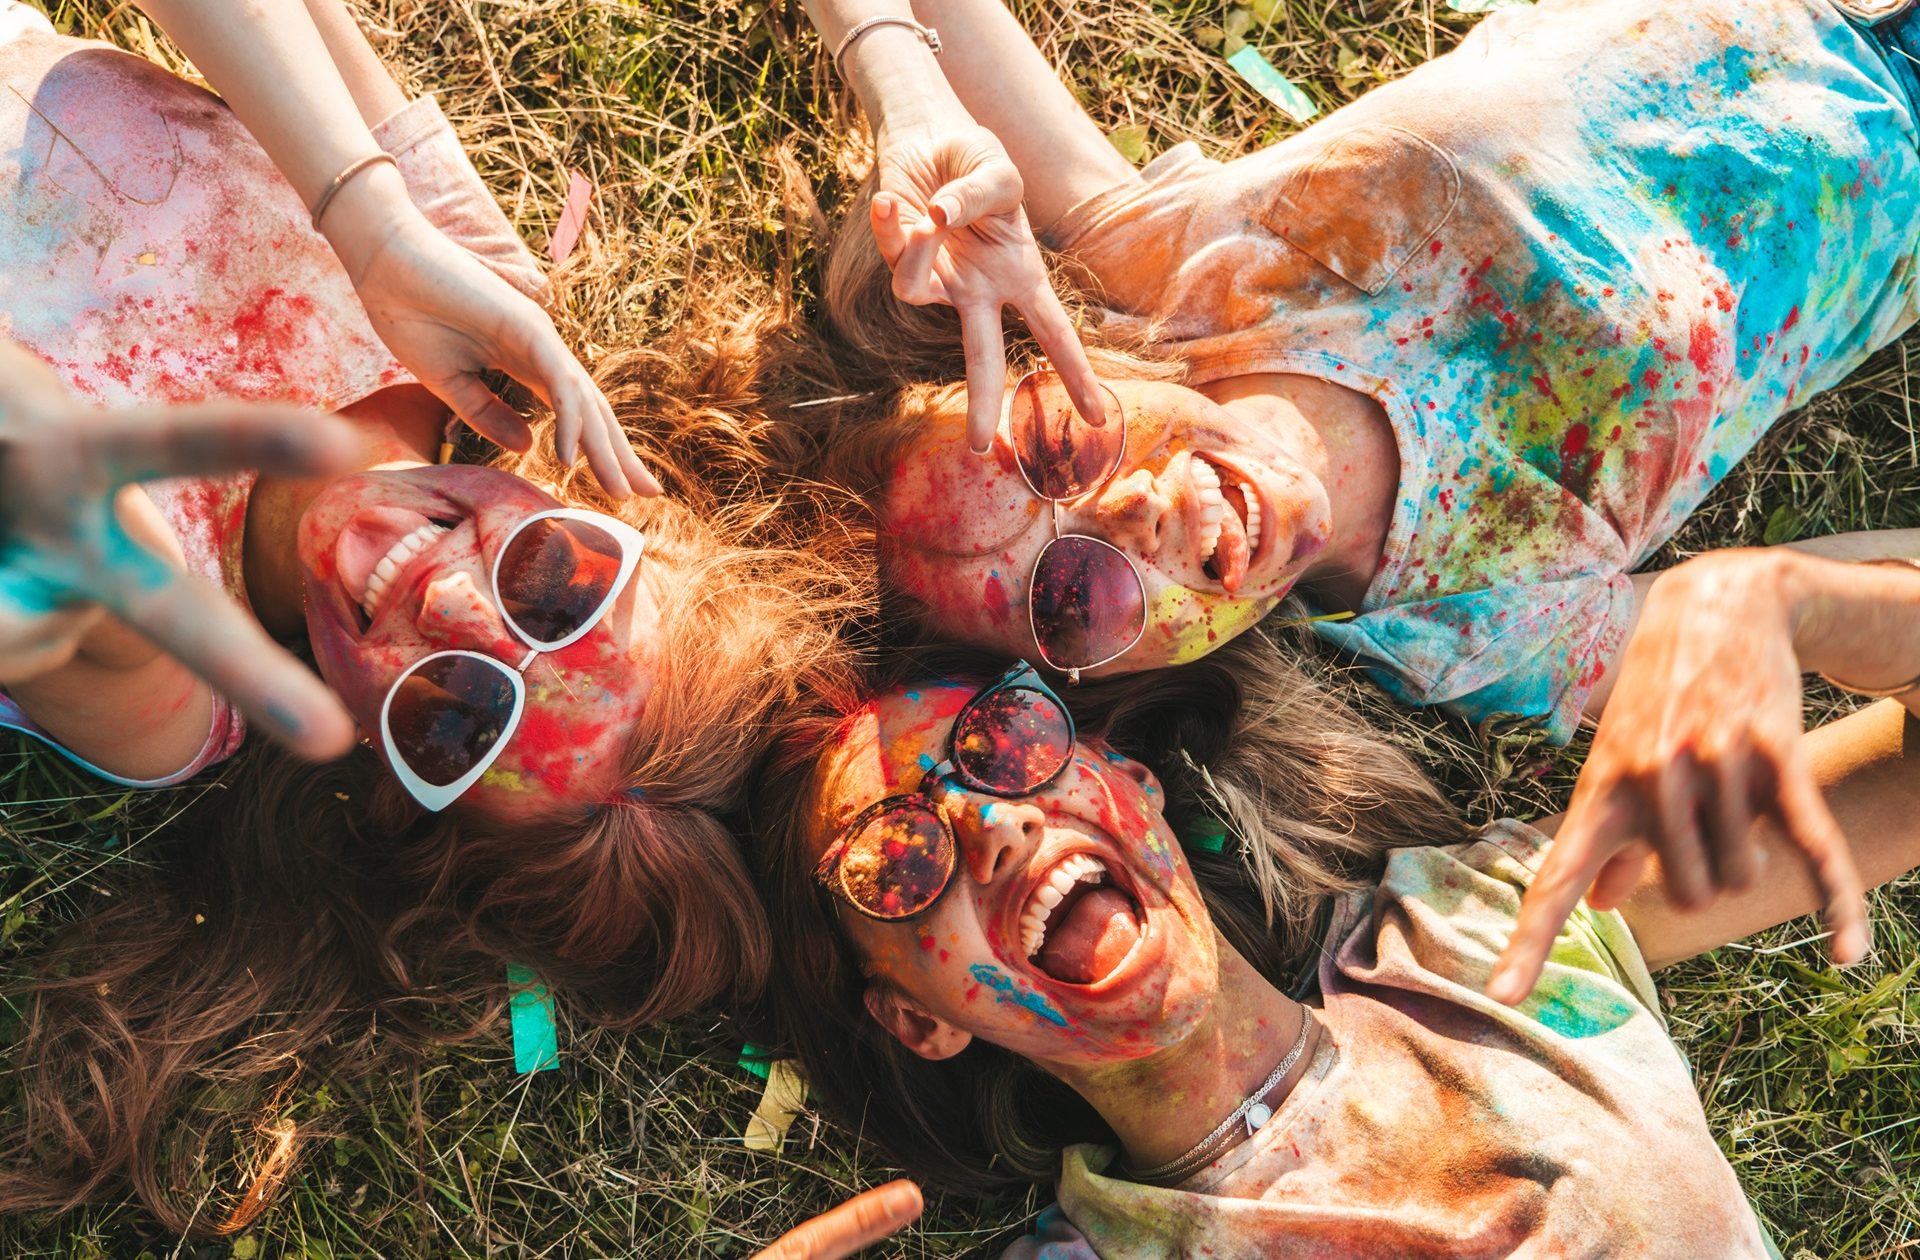 Three happy beautiful girls making party at Holi colors festival in summer time.Young  smiling women friends having fun after music event at sunset.Models lying on the grass in sunglasses